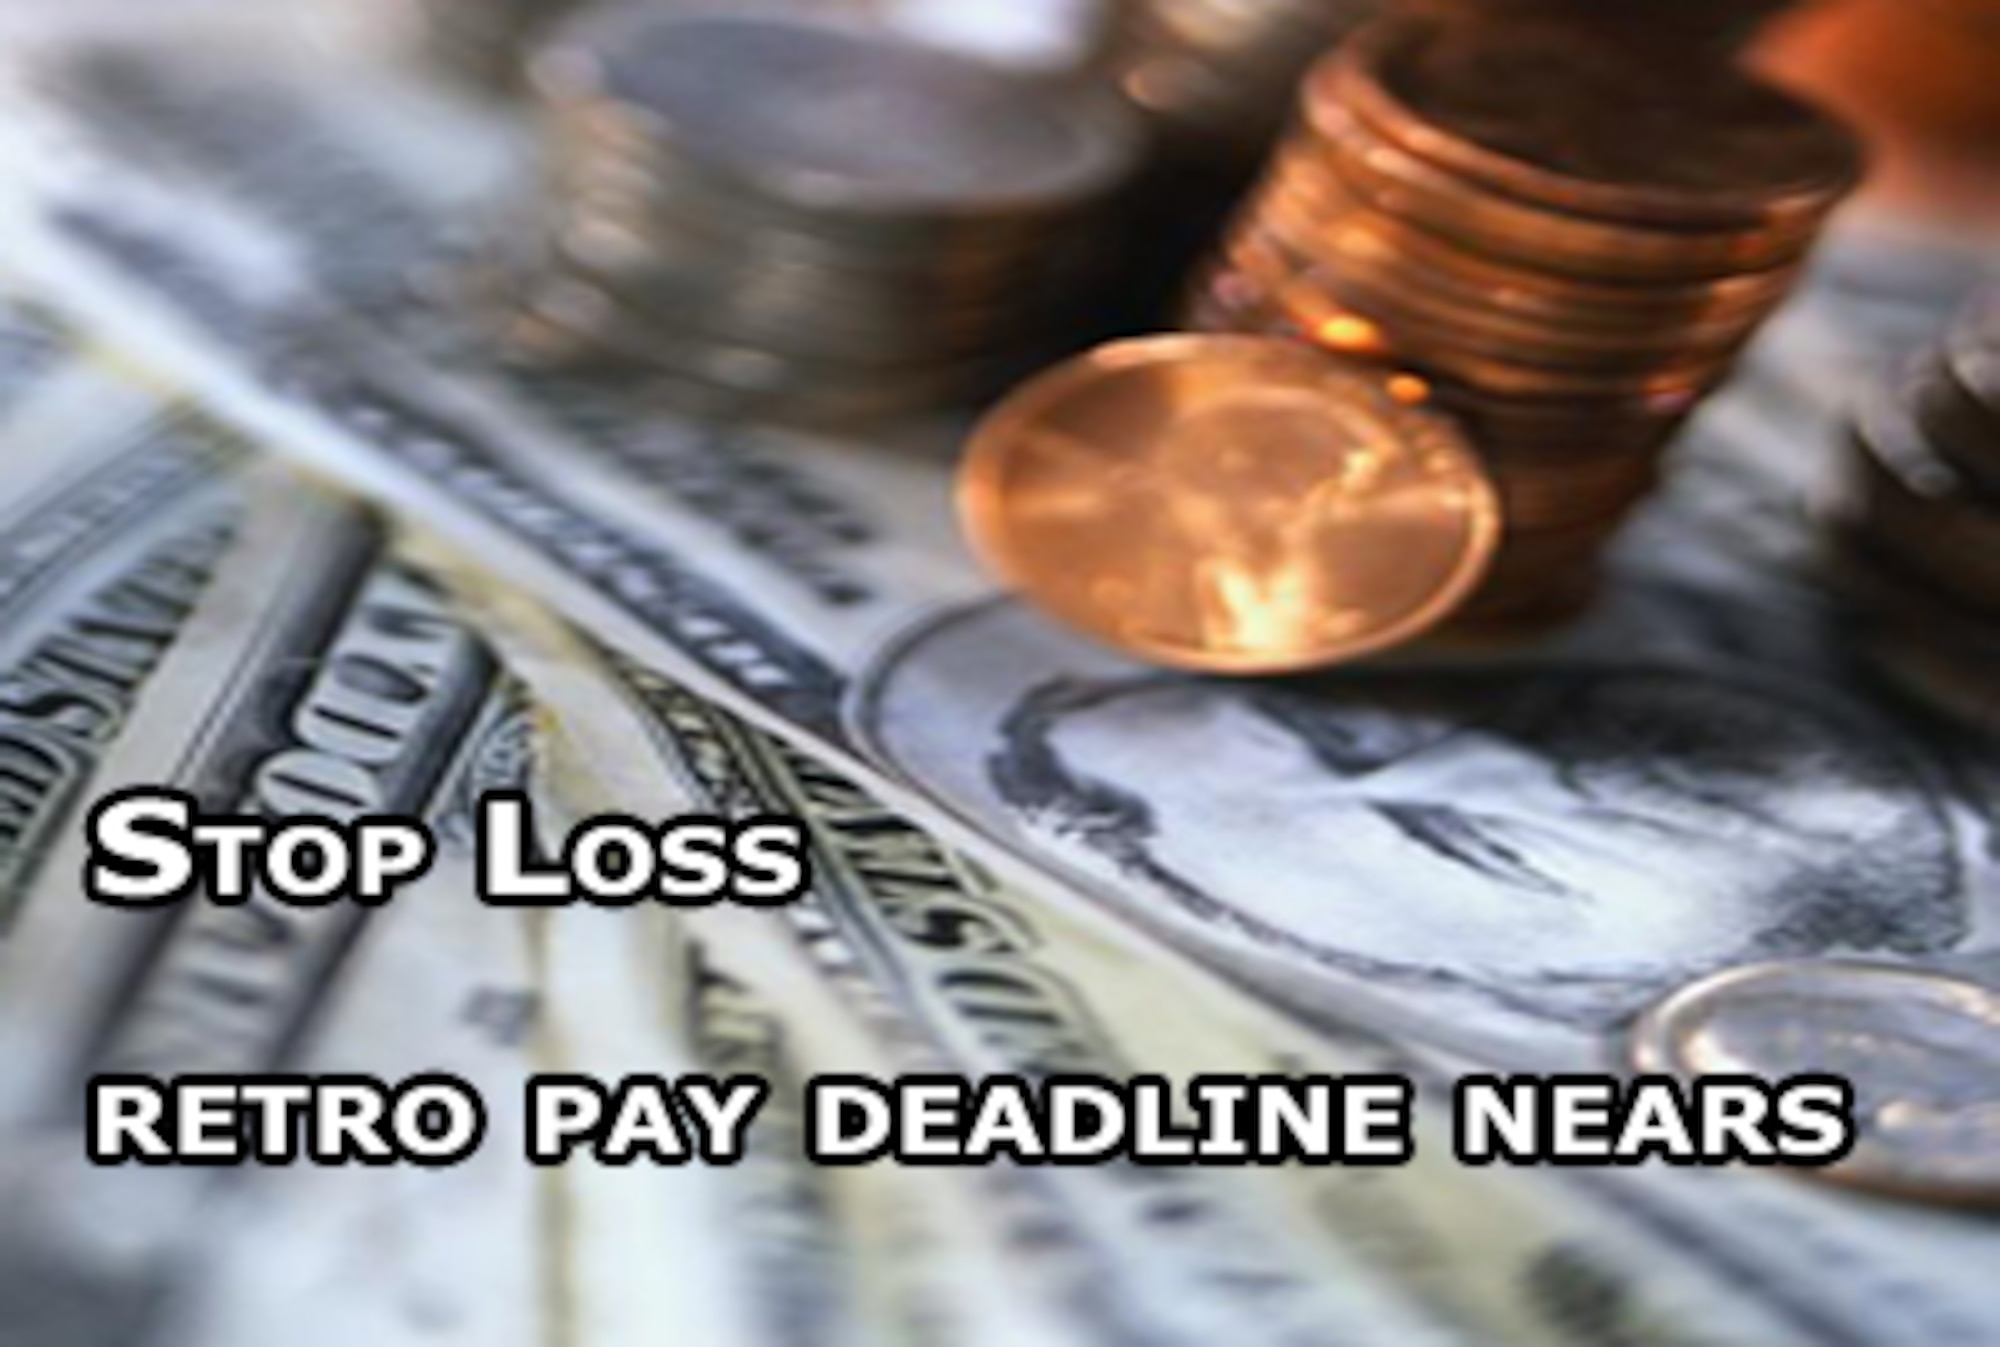 Stop loss special pay deadline nears > Air Force > Article Display